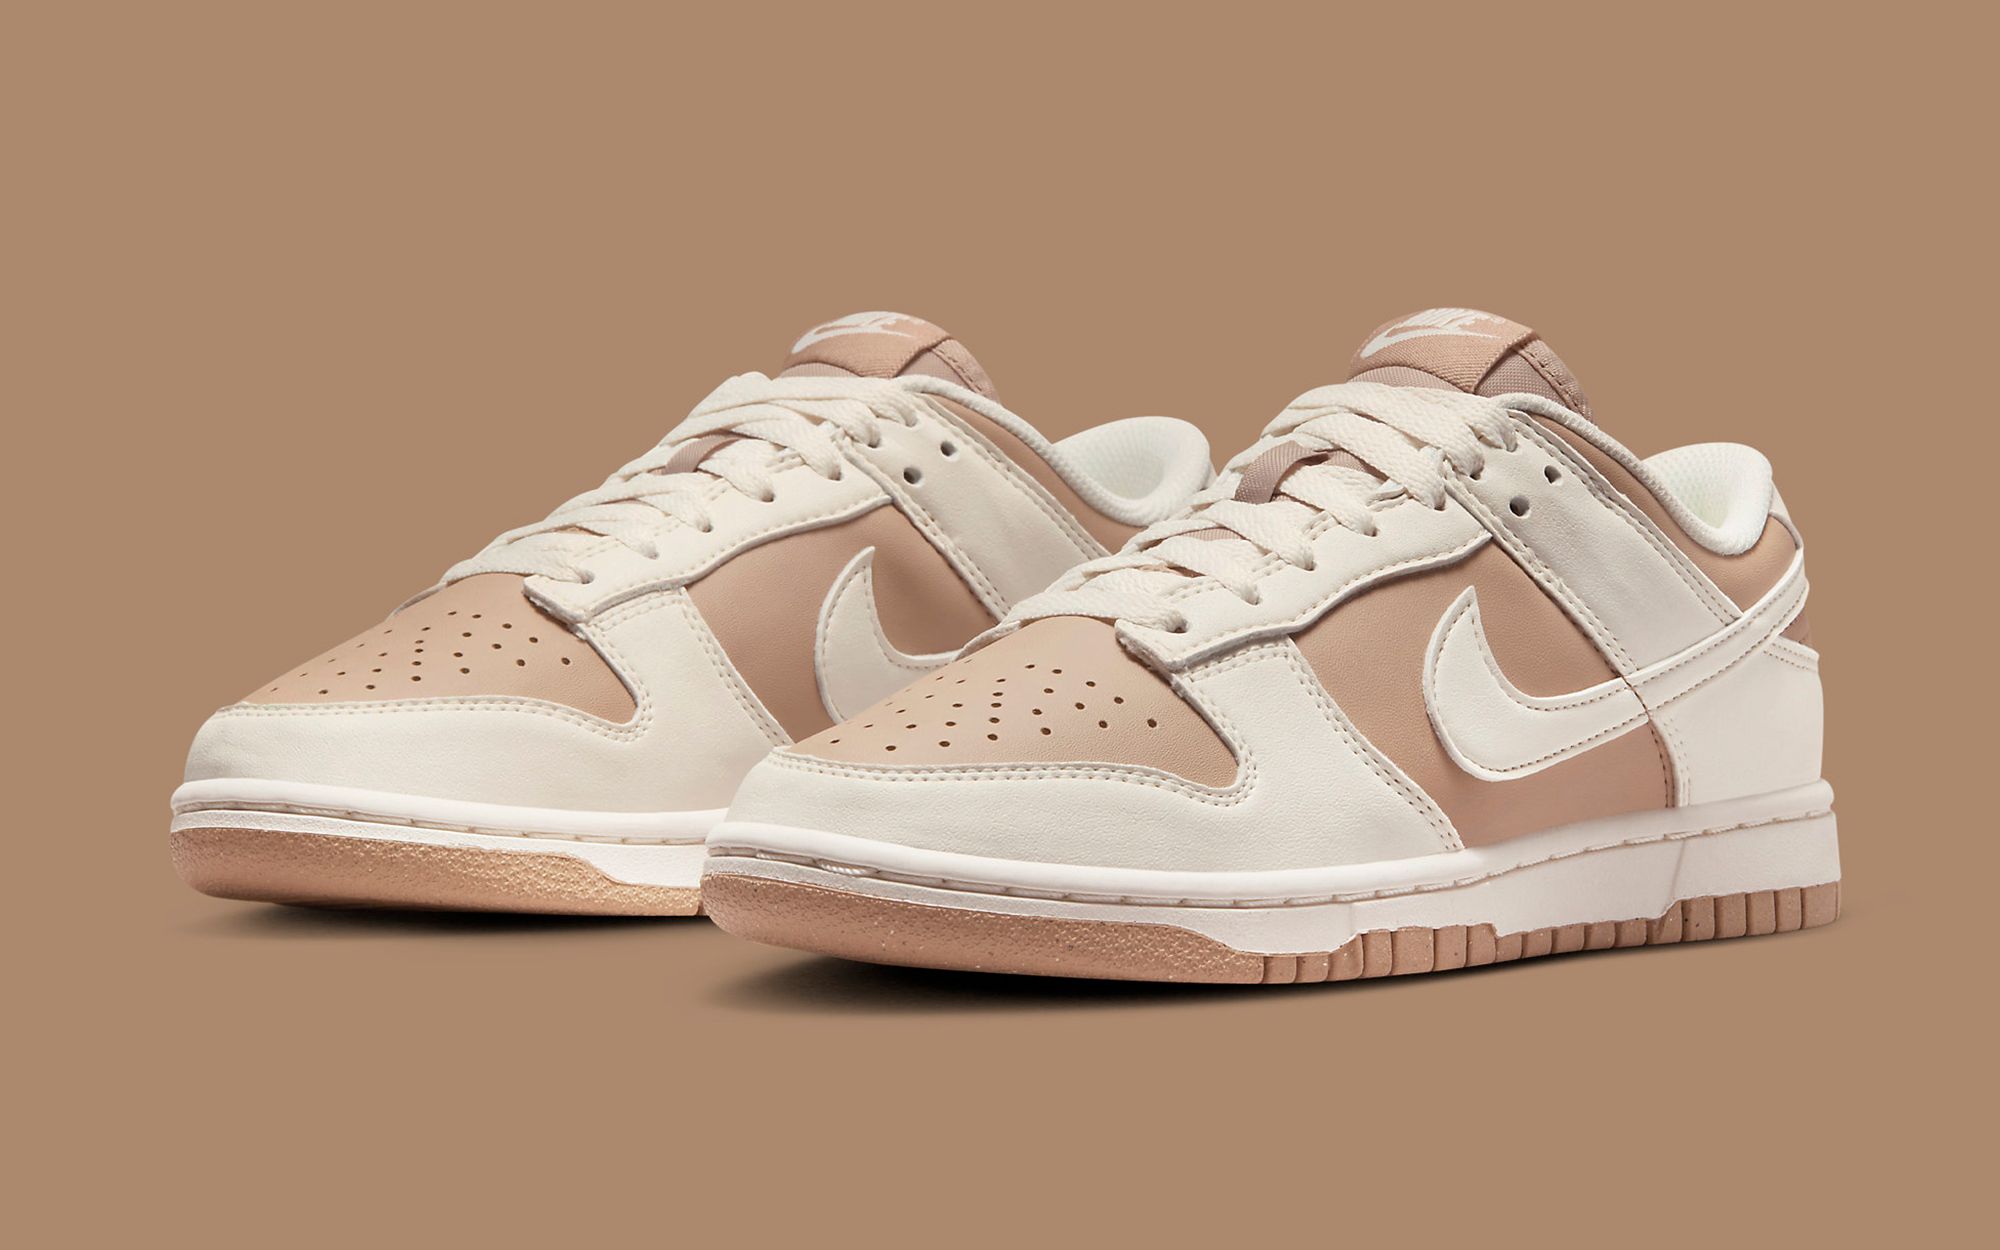 Where to Buy the Nike Dunk Low Next Nature “Hemp” | House of Heat°